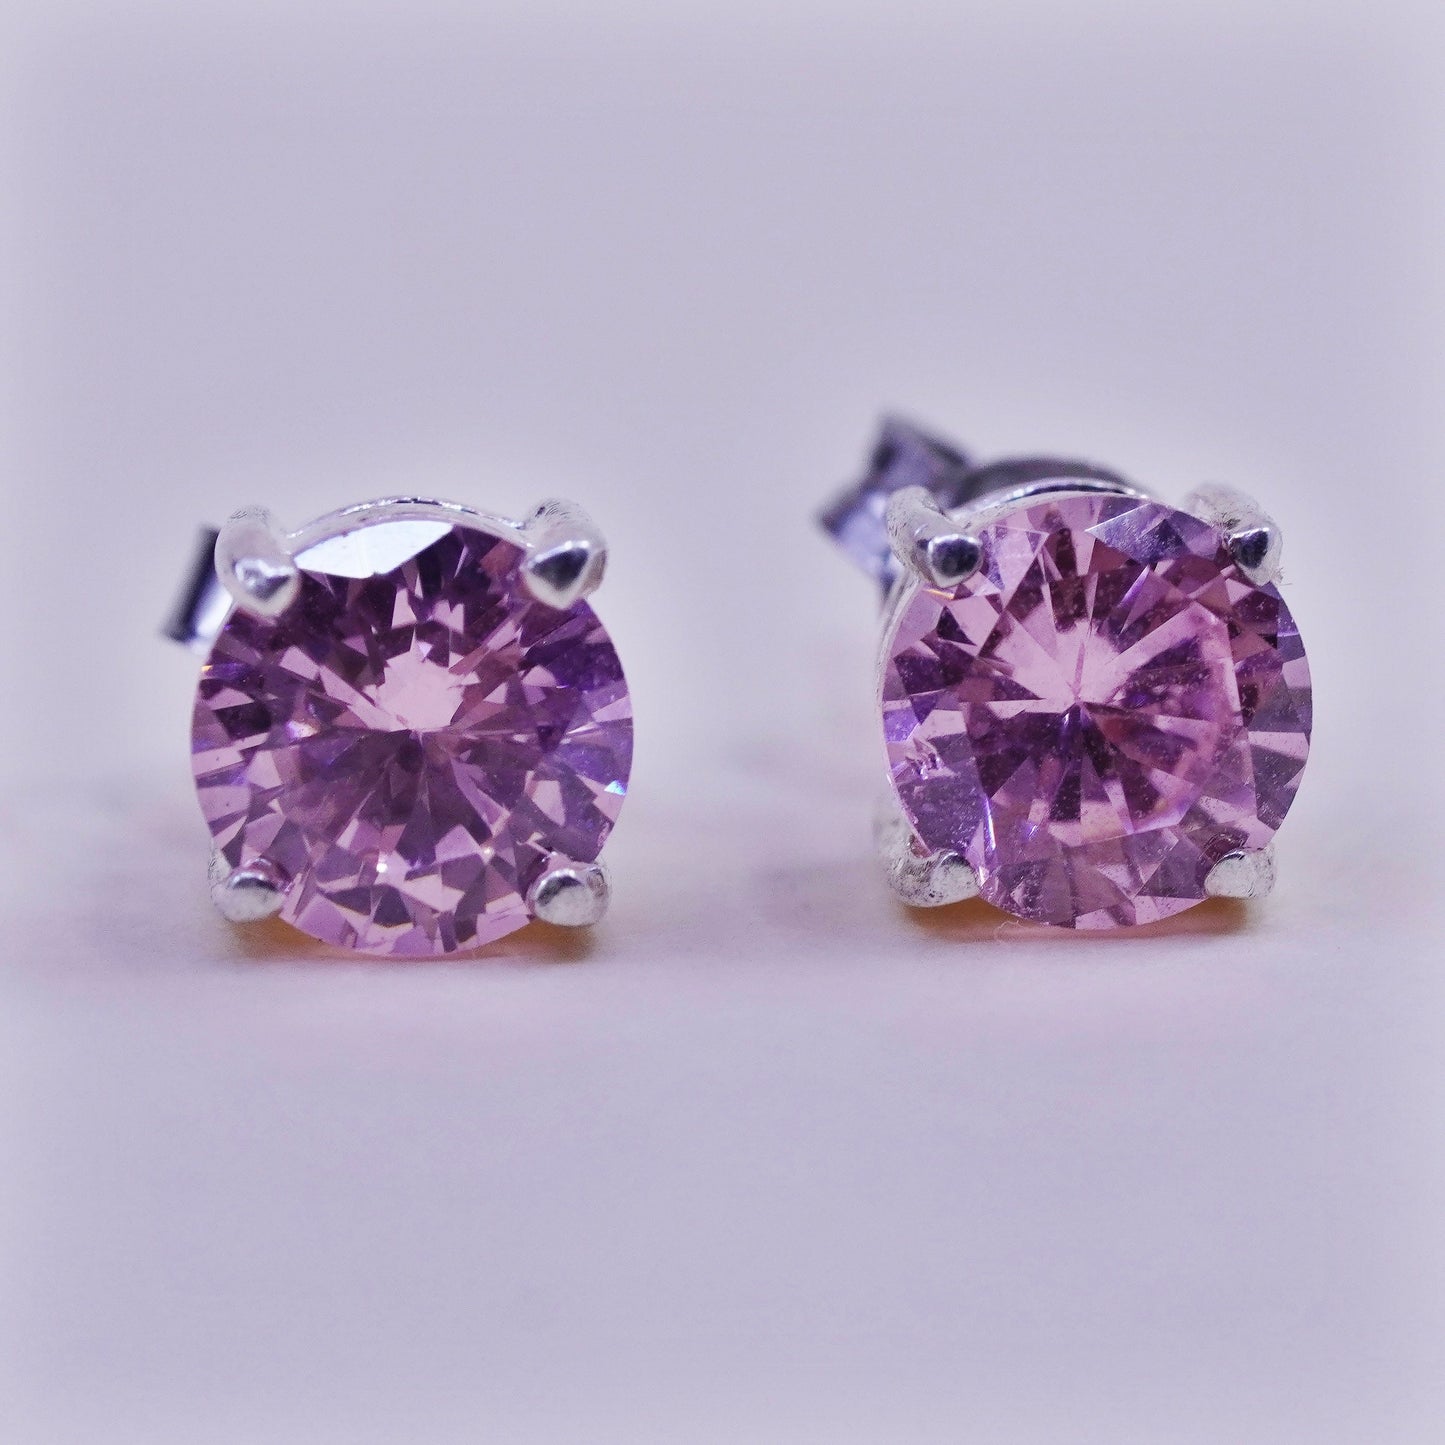 Vintage sterling silver studs with pink Cz, fashion minimalist earrings